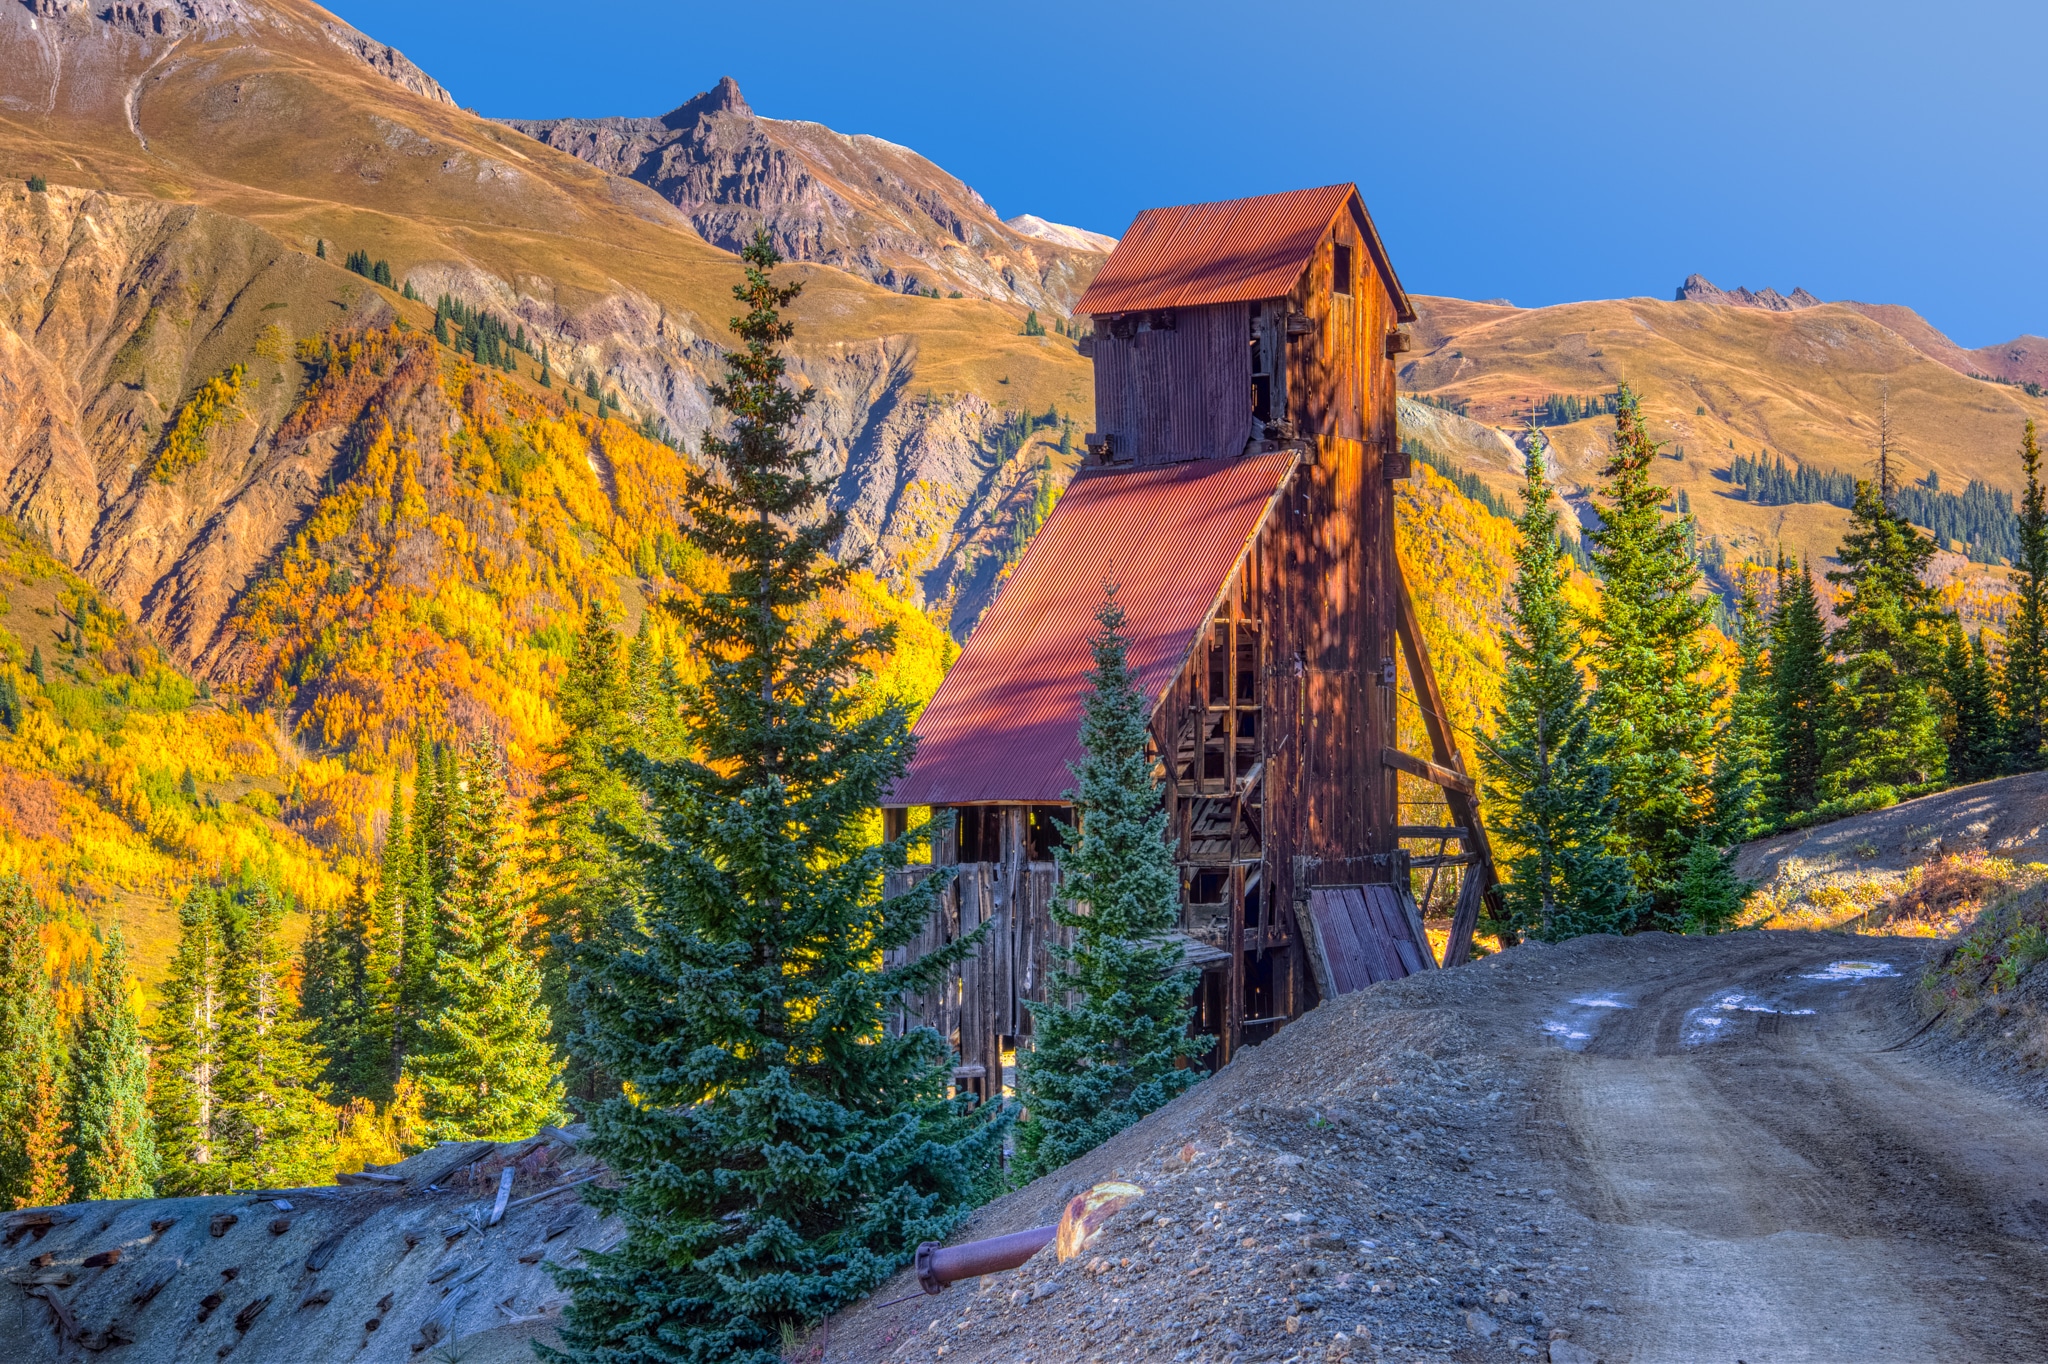 Morning light picks out features on the headframe of the Yankee Girl Mine near Ouray, CO, on Ouray County Road 31. In the distance aspens and scrub oal color the mountainside.